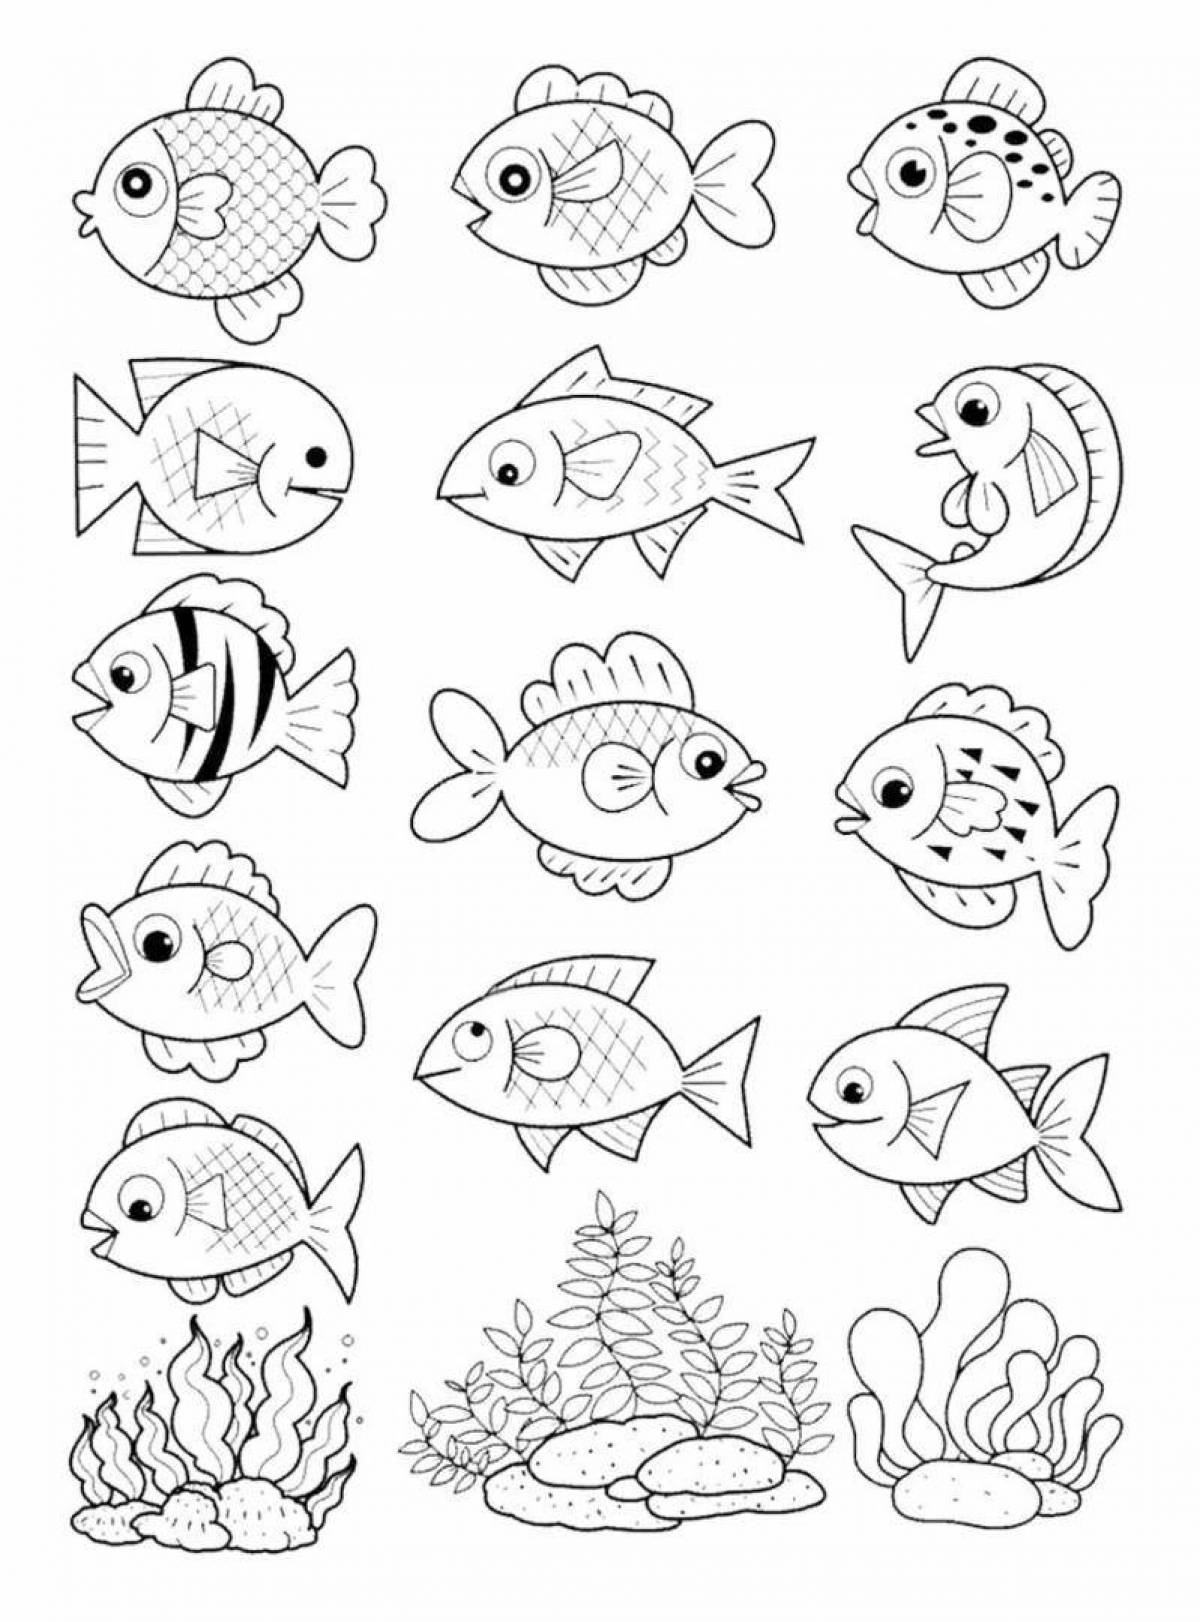 Colourful aquarium fish coloring book for 4-5 year olds